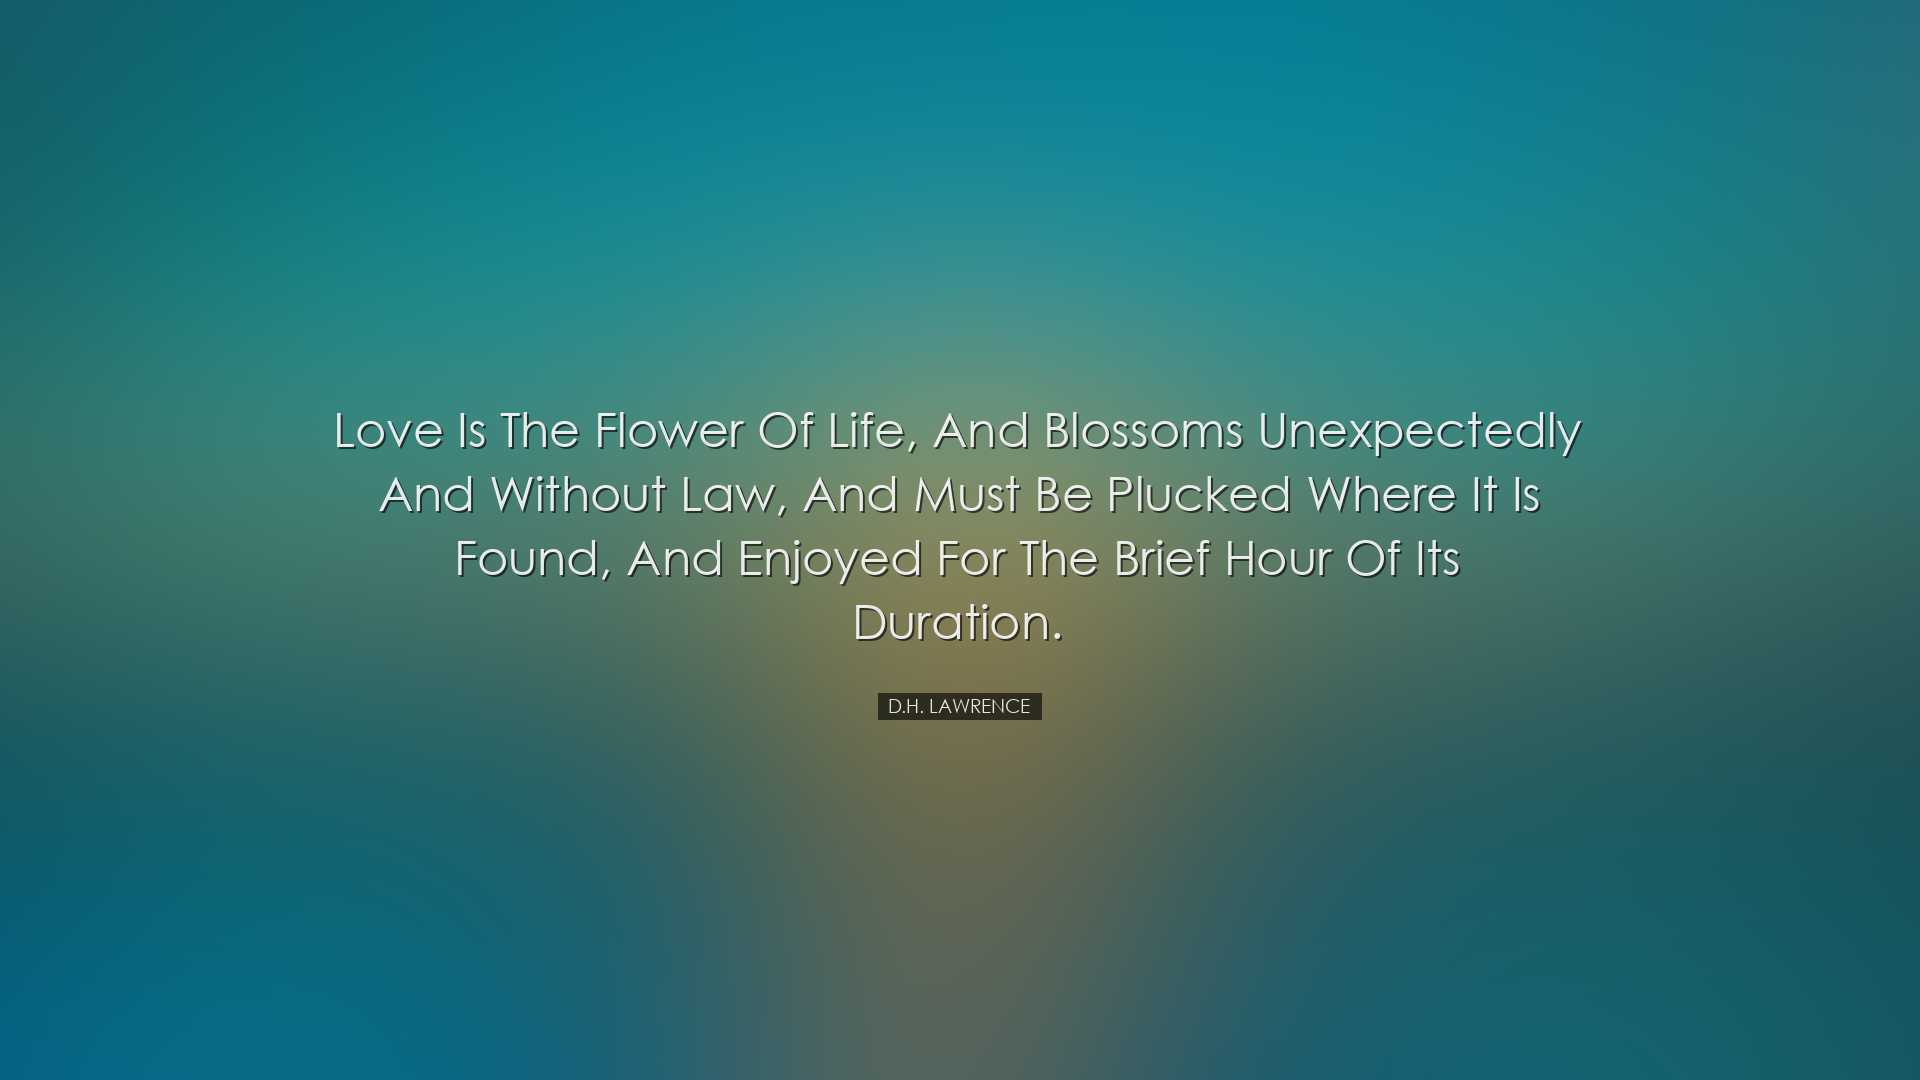 Love is the flower of life, and blossoms unexpectedly and without